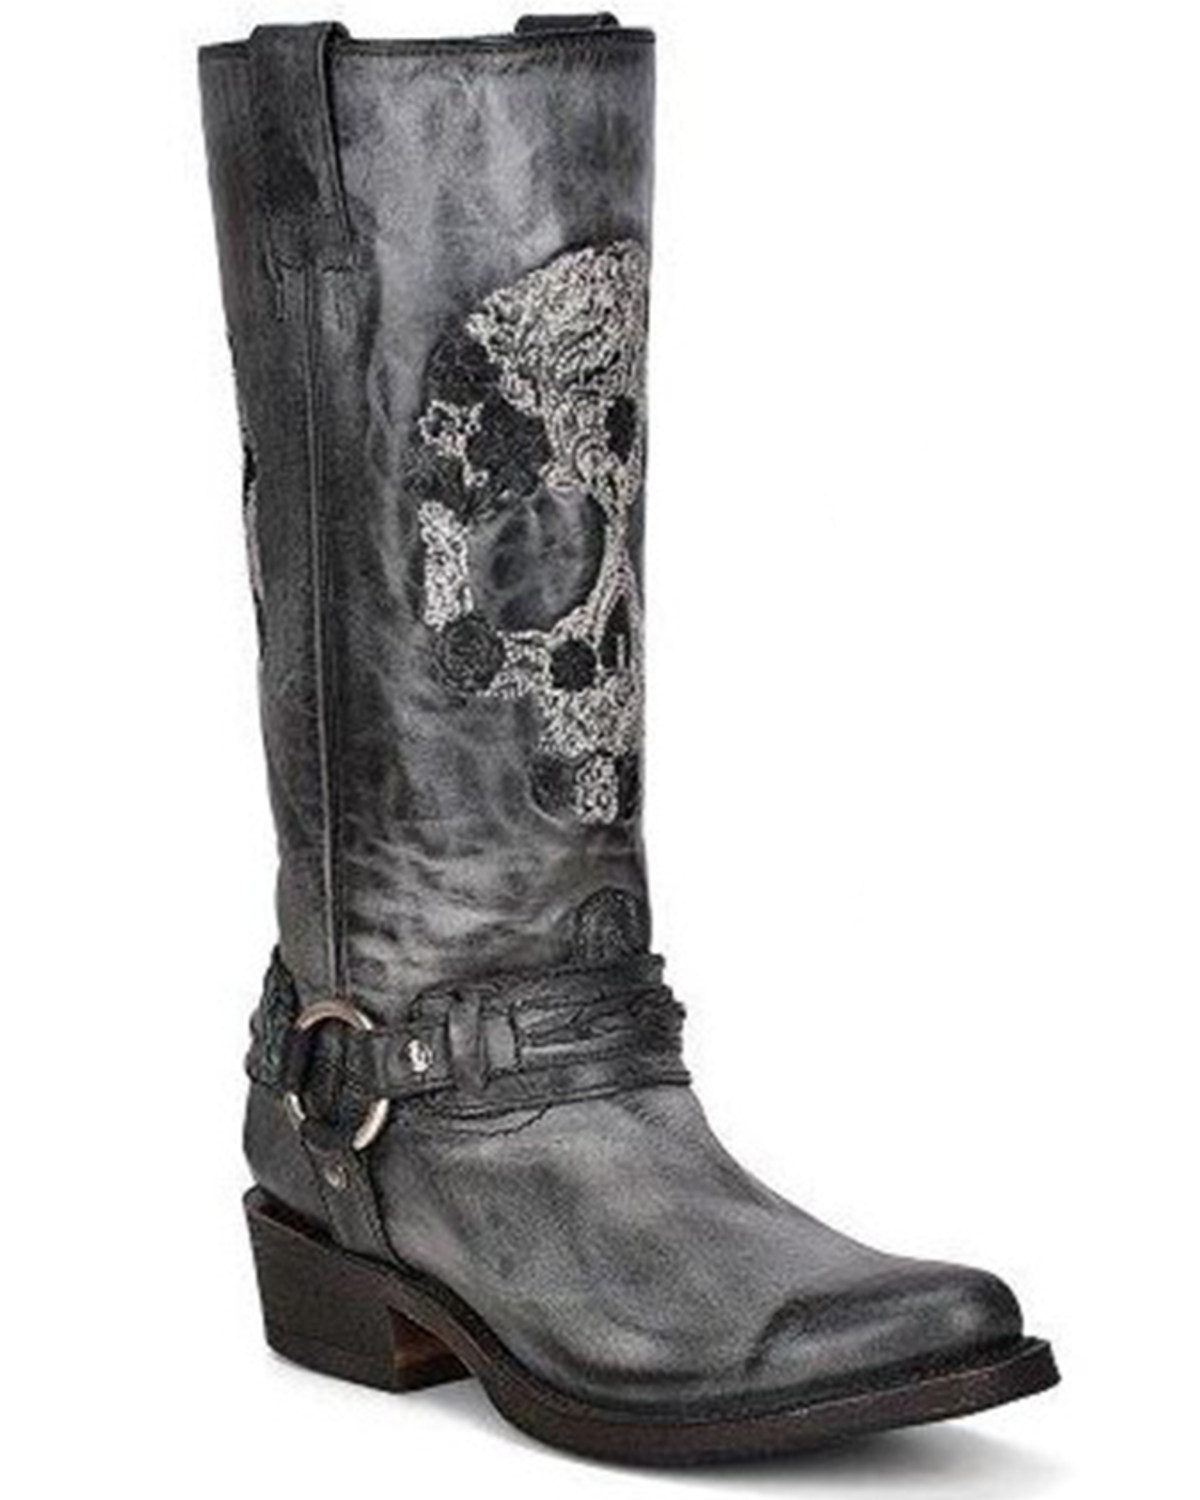 Corral Women's Embroidered Skull & Harness Western Boots - Round Toe